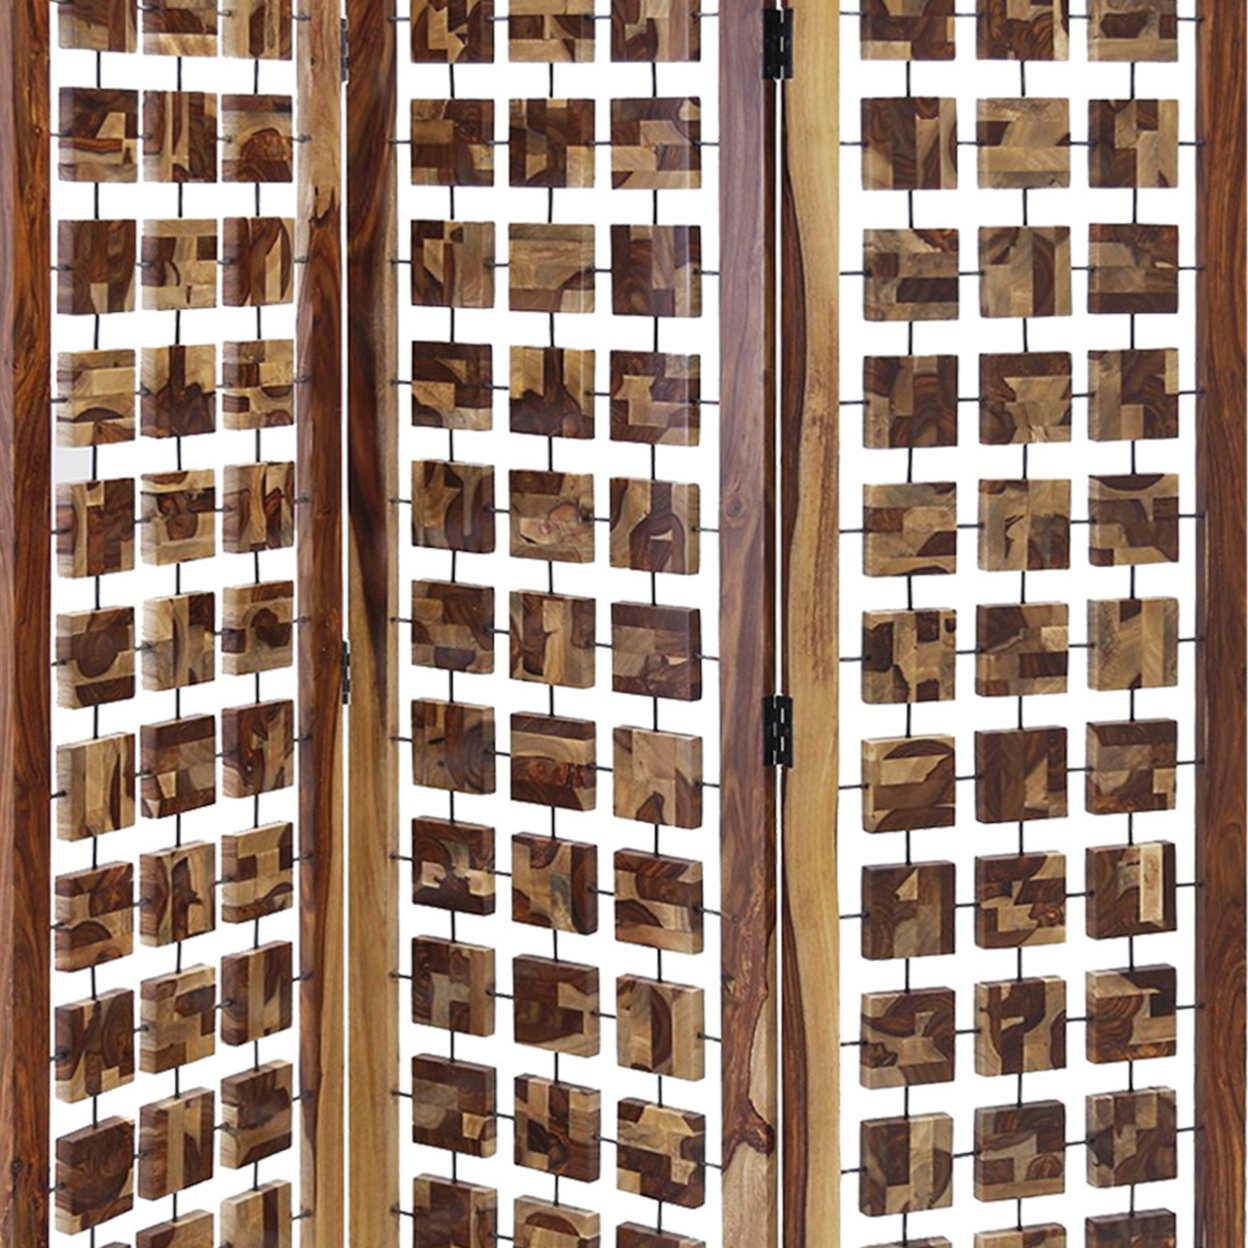 Wooden 3 Panel Room Divider With Interconnected Square Blocks, Brown- Saltoro Sherpi